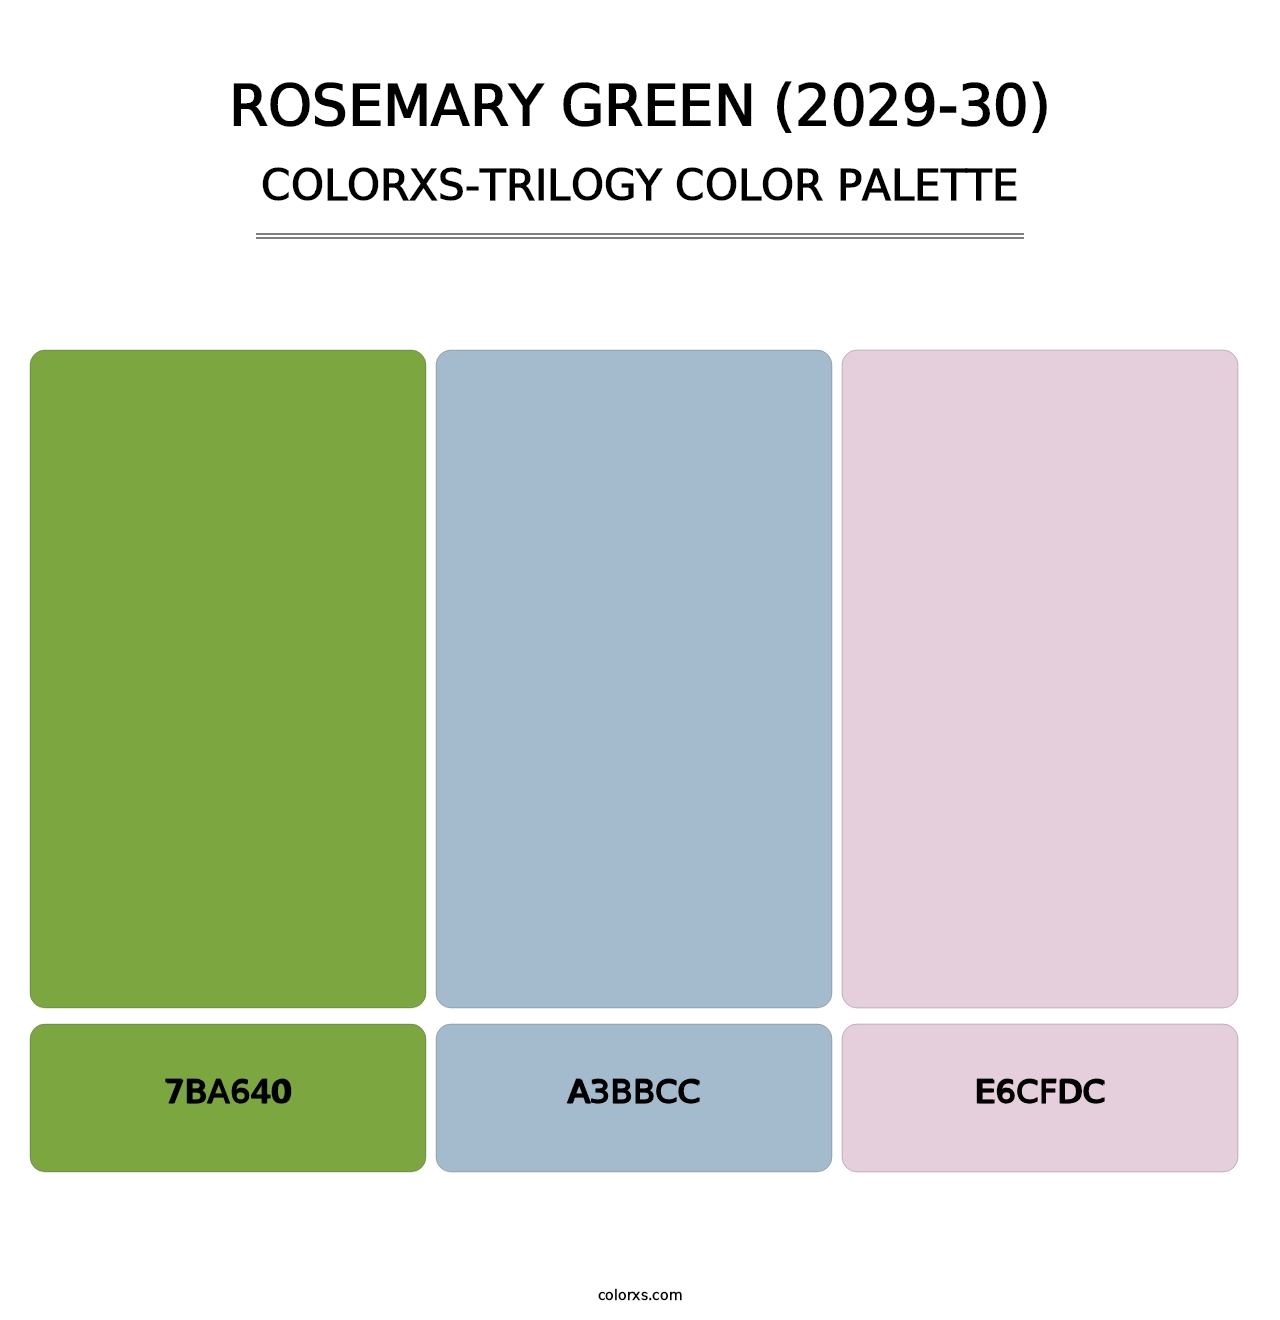 Rosemary Green (2029-30) - Colorxs Trilogy Palette